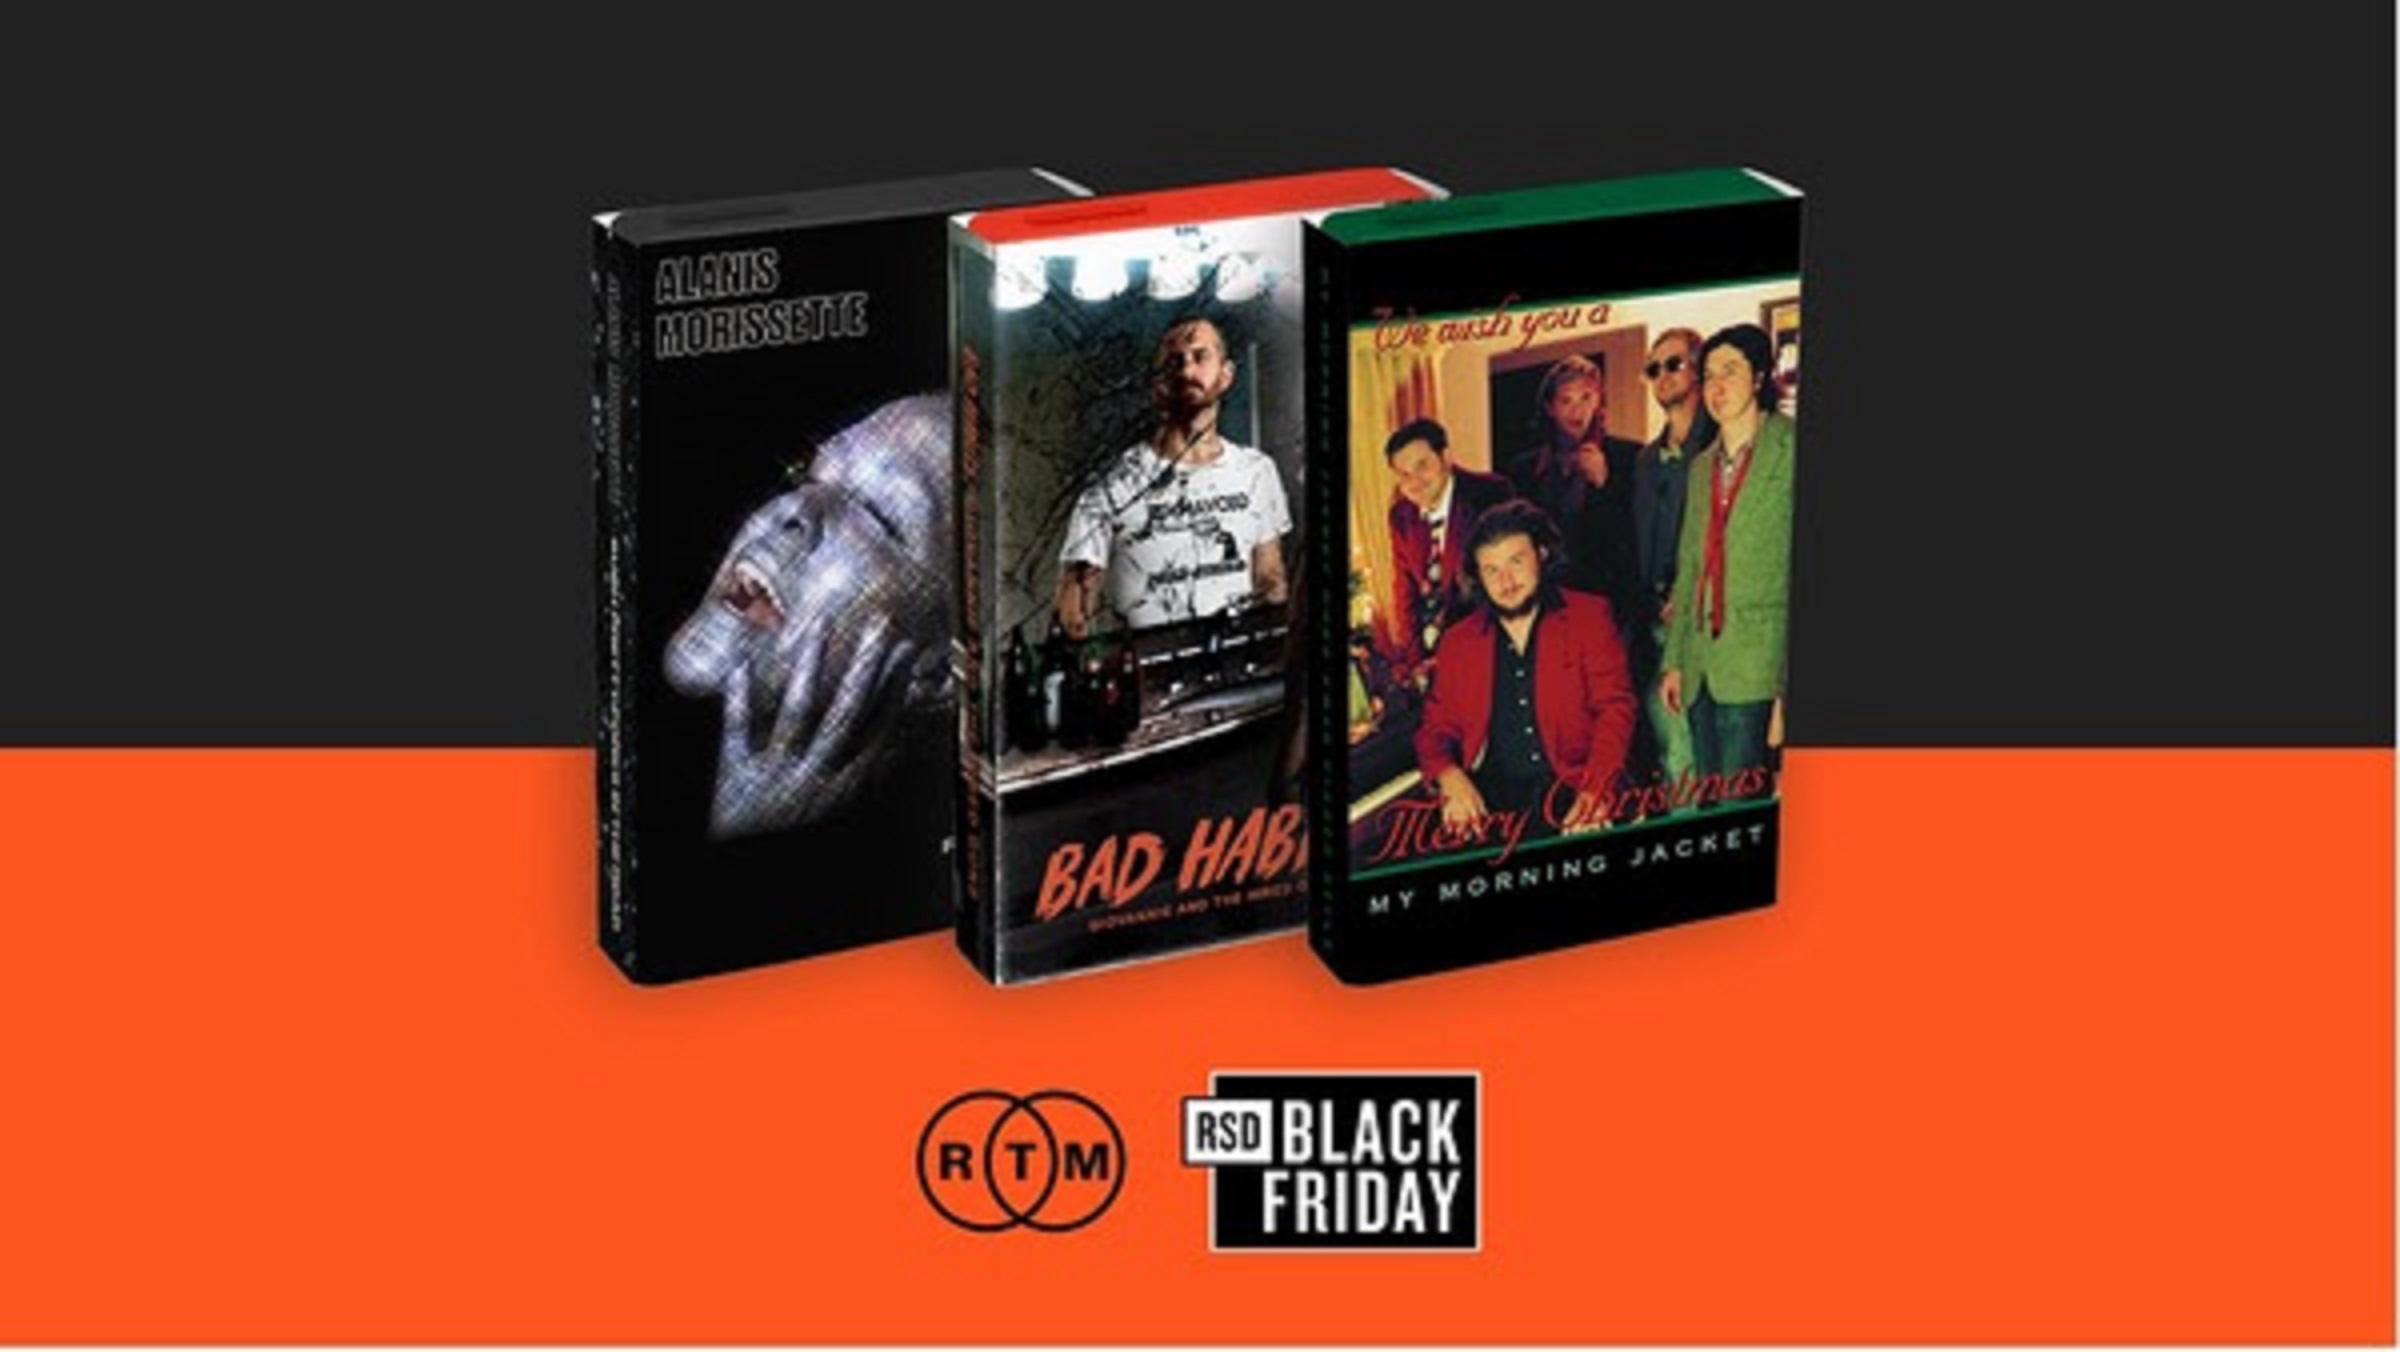 Alanis Morissette, My Morning Jacket & Giovannie and the Hired Guns line up cassette-only releases for RSD Black Friday